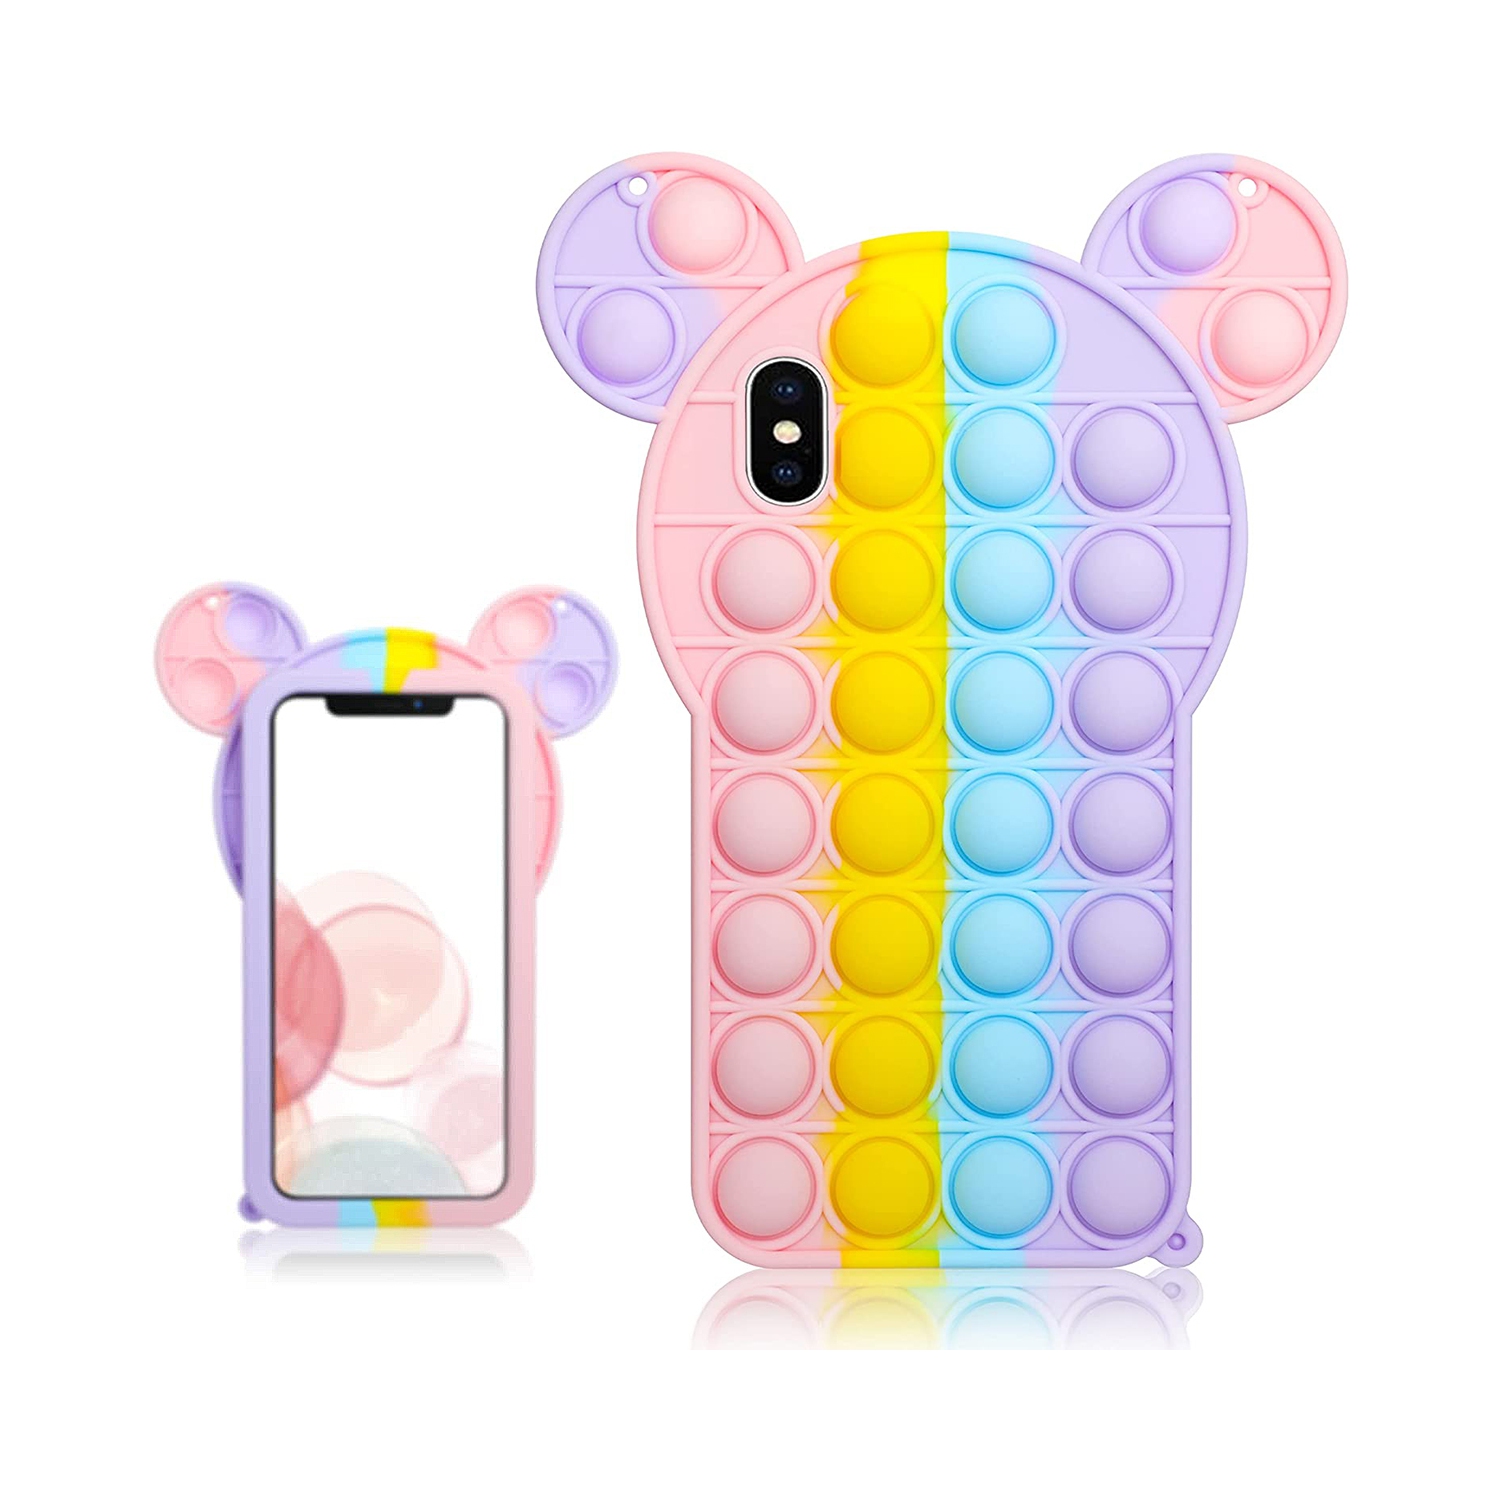 Cartoon Big Ear Style Pop Fidget Toy Soft TPU Silicone Protective Case Cover For Apple iPhone XS Max - Rainbow